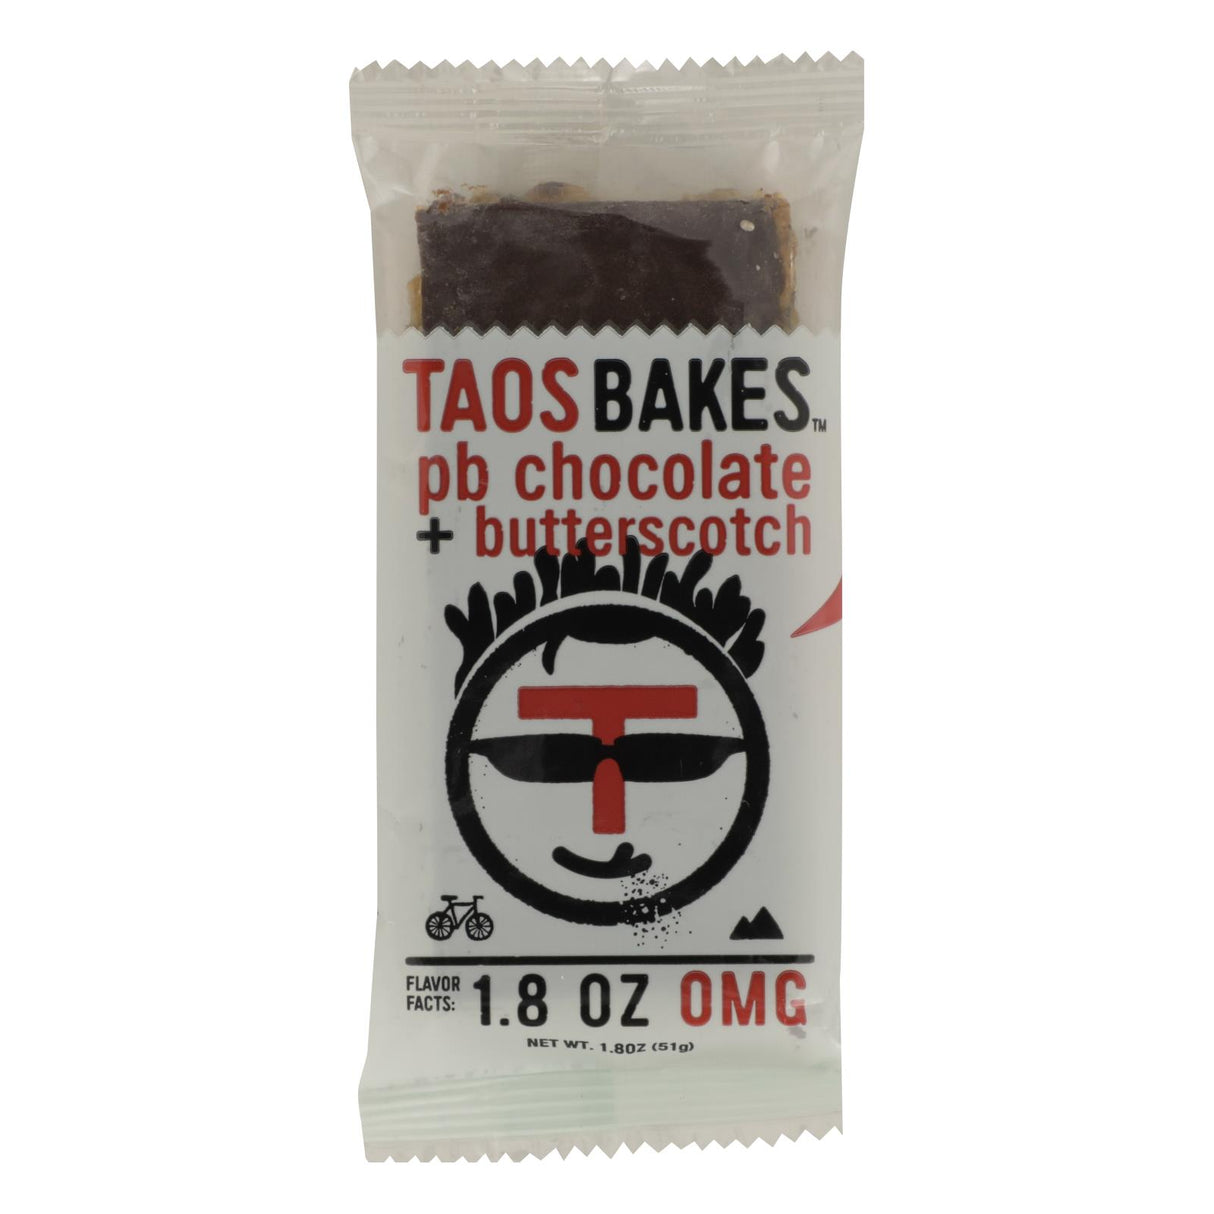 Taos Bakes Chocolate Peanut Butter Butterscotch Cookie Bites, 1.8 Oz, Pack of 12 - Cozy Farm 